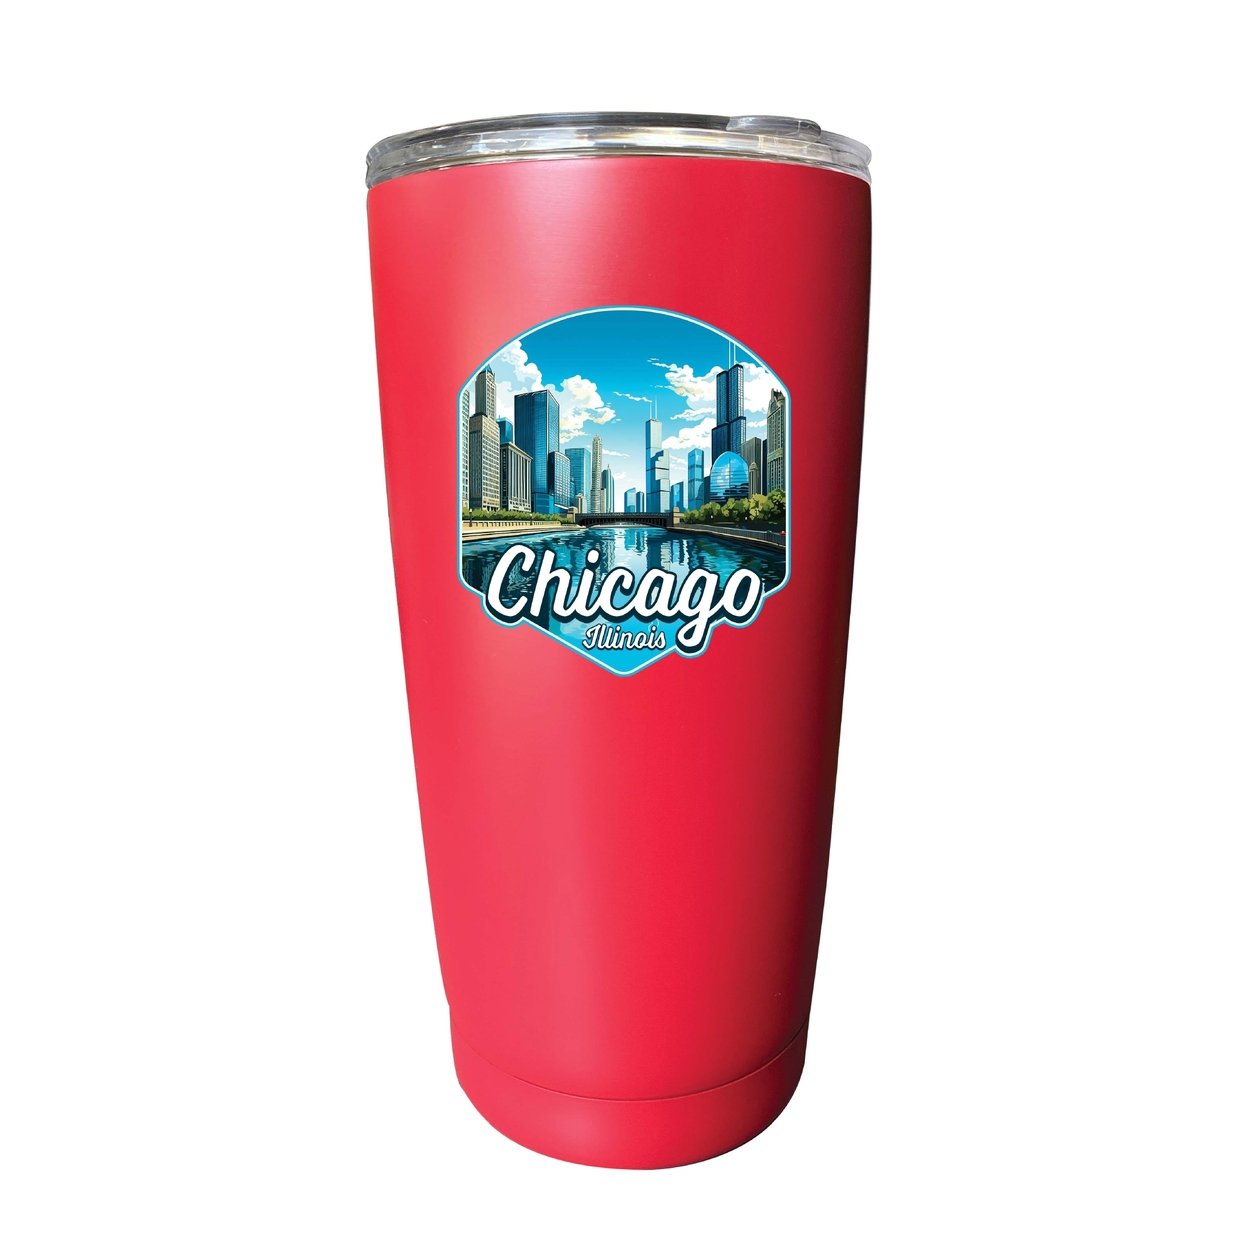 Chicago Illinois A Souvenir 16 Oz Insulated Tumbler - Red,,2-Pack